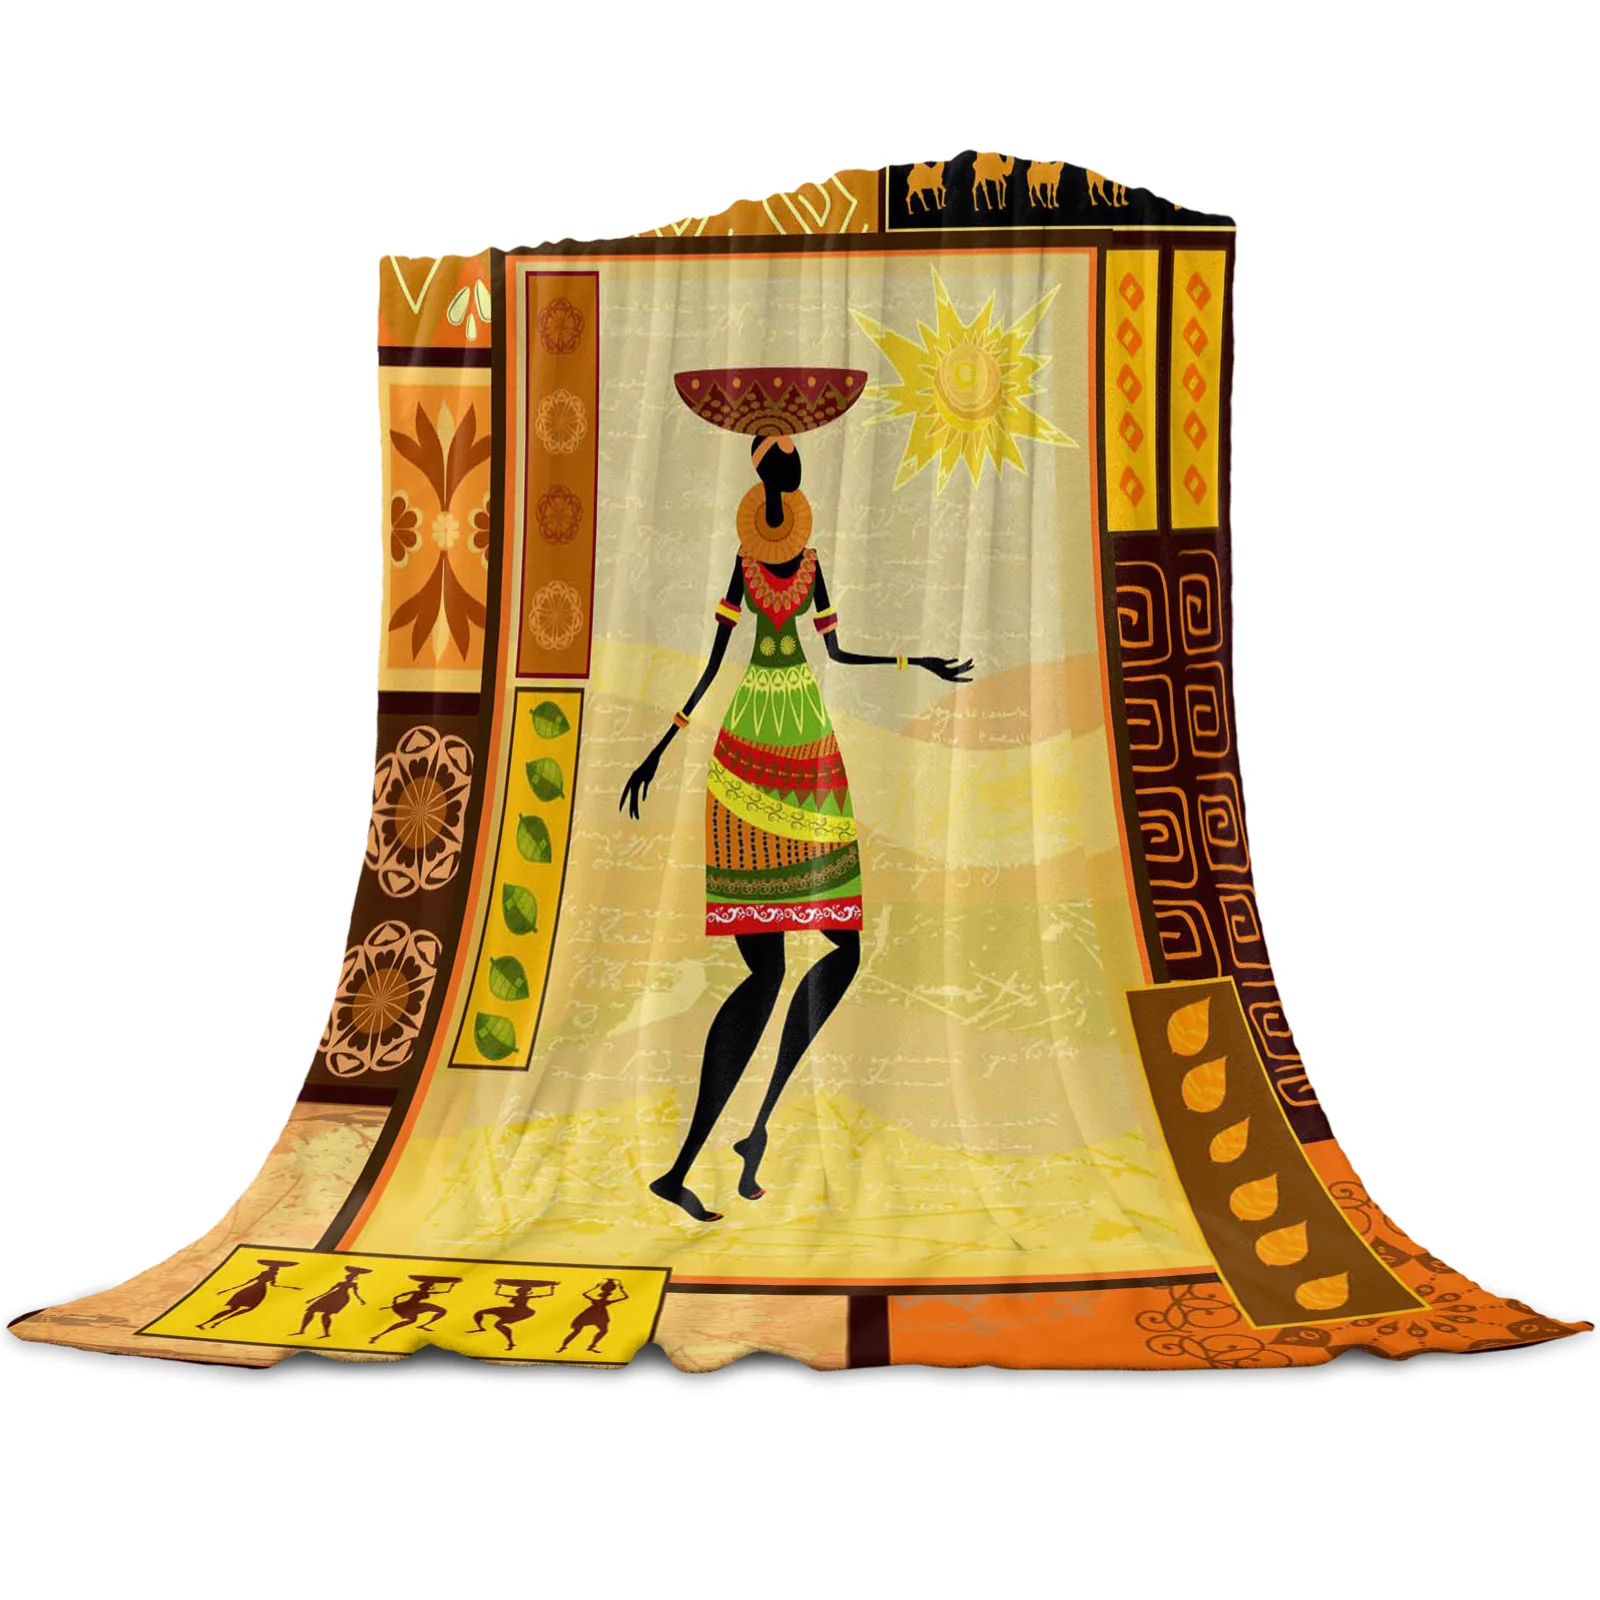 

African Girl Ethnic Culture Throw Blanket Soft Comfortable Microfiber Flannel Plush Blankets Warm Sofa Bed Sheets